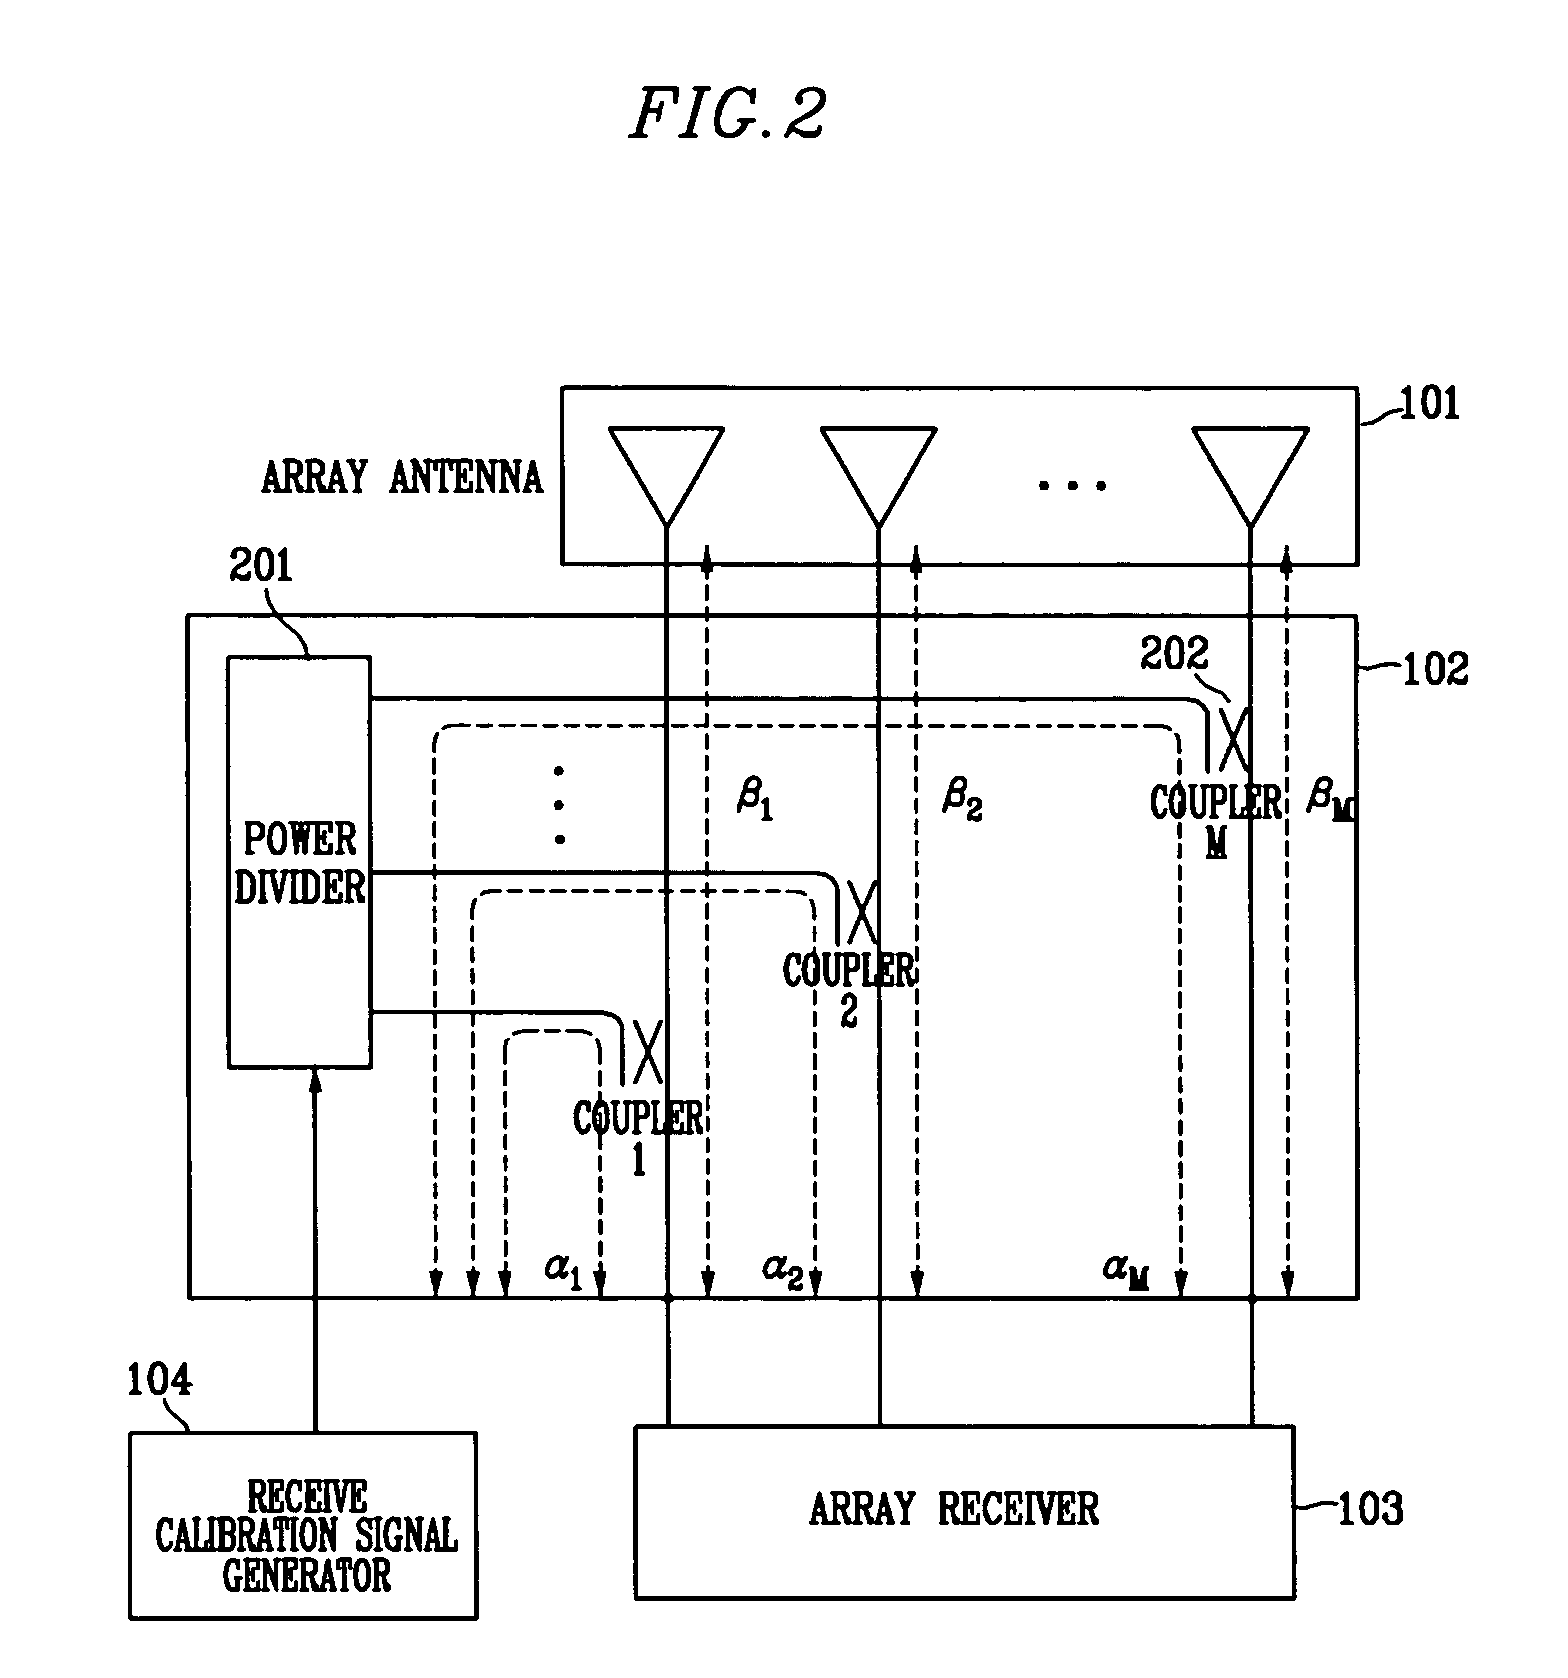 Transmitting and receiving apparatus and method in adaptive array antenna system capable of real-time error calibration